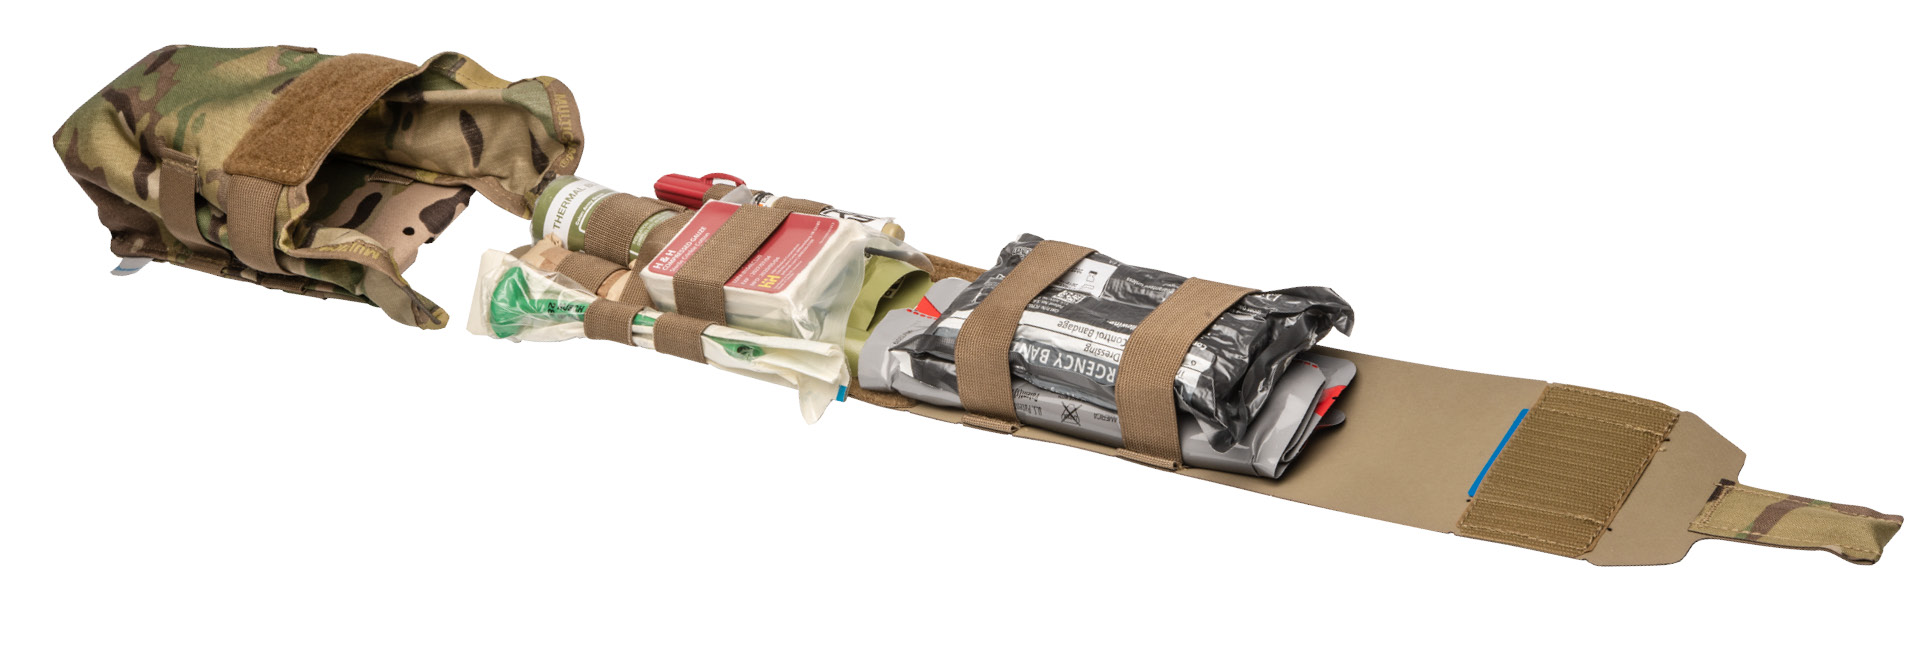 Small Medical Trauma Kit with compact supplies